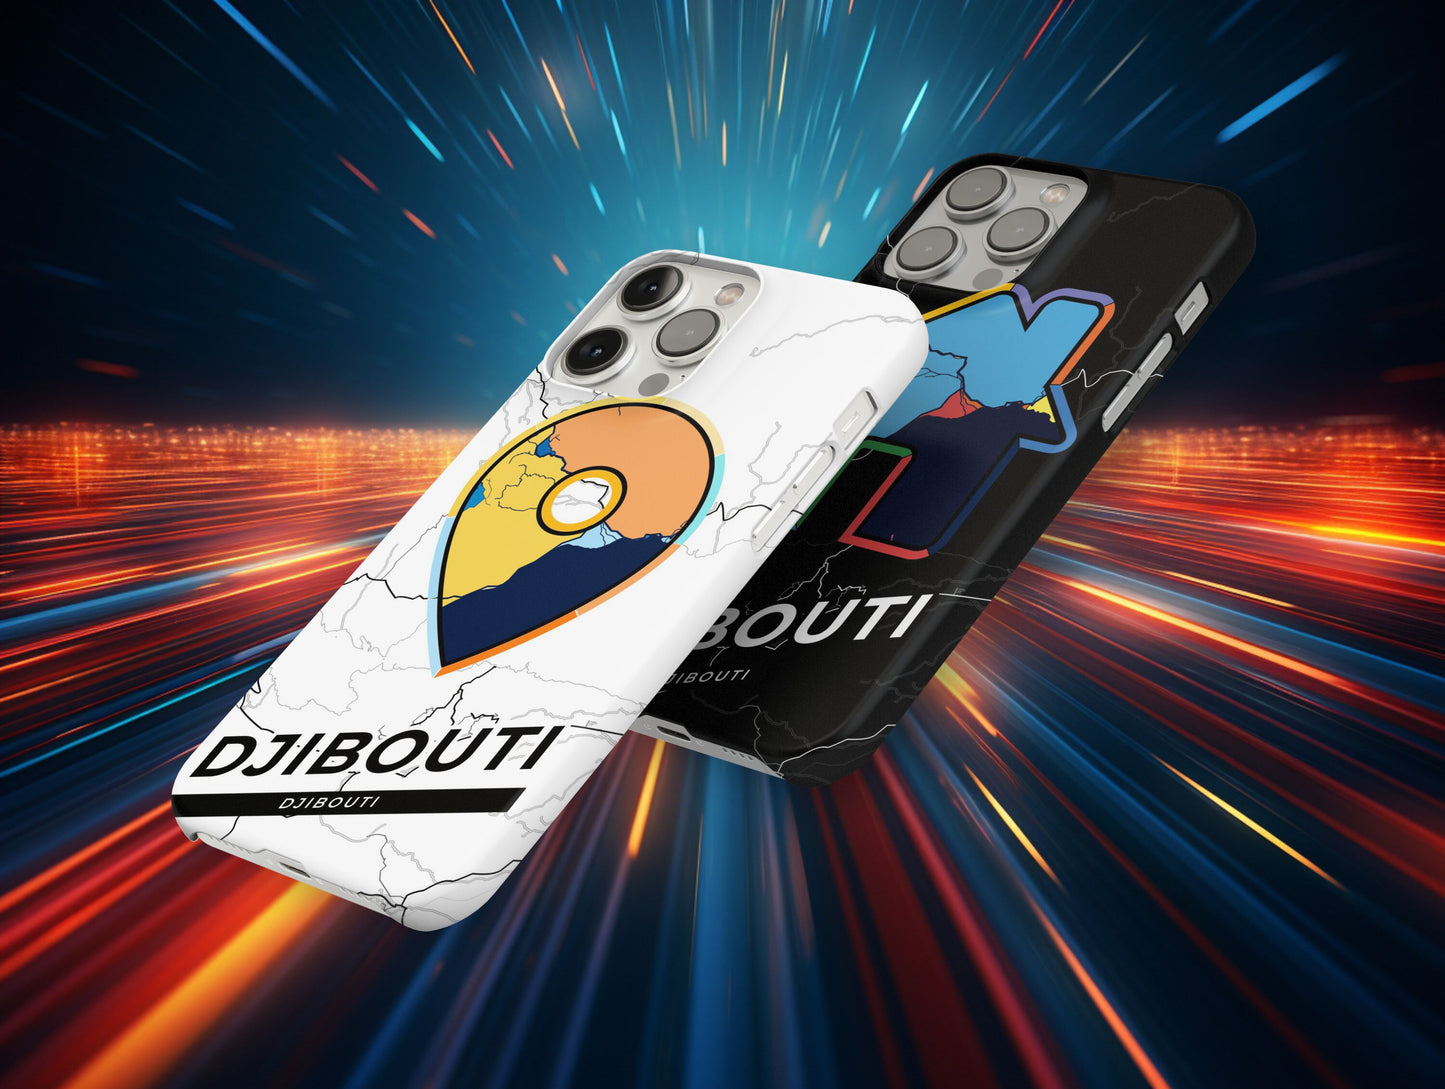 Djibouti Djibouti slim phone case with colorful icon. Birthday, wedding or housewarming gift. Couple match cases.